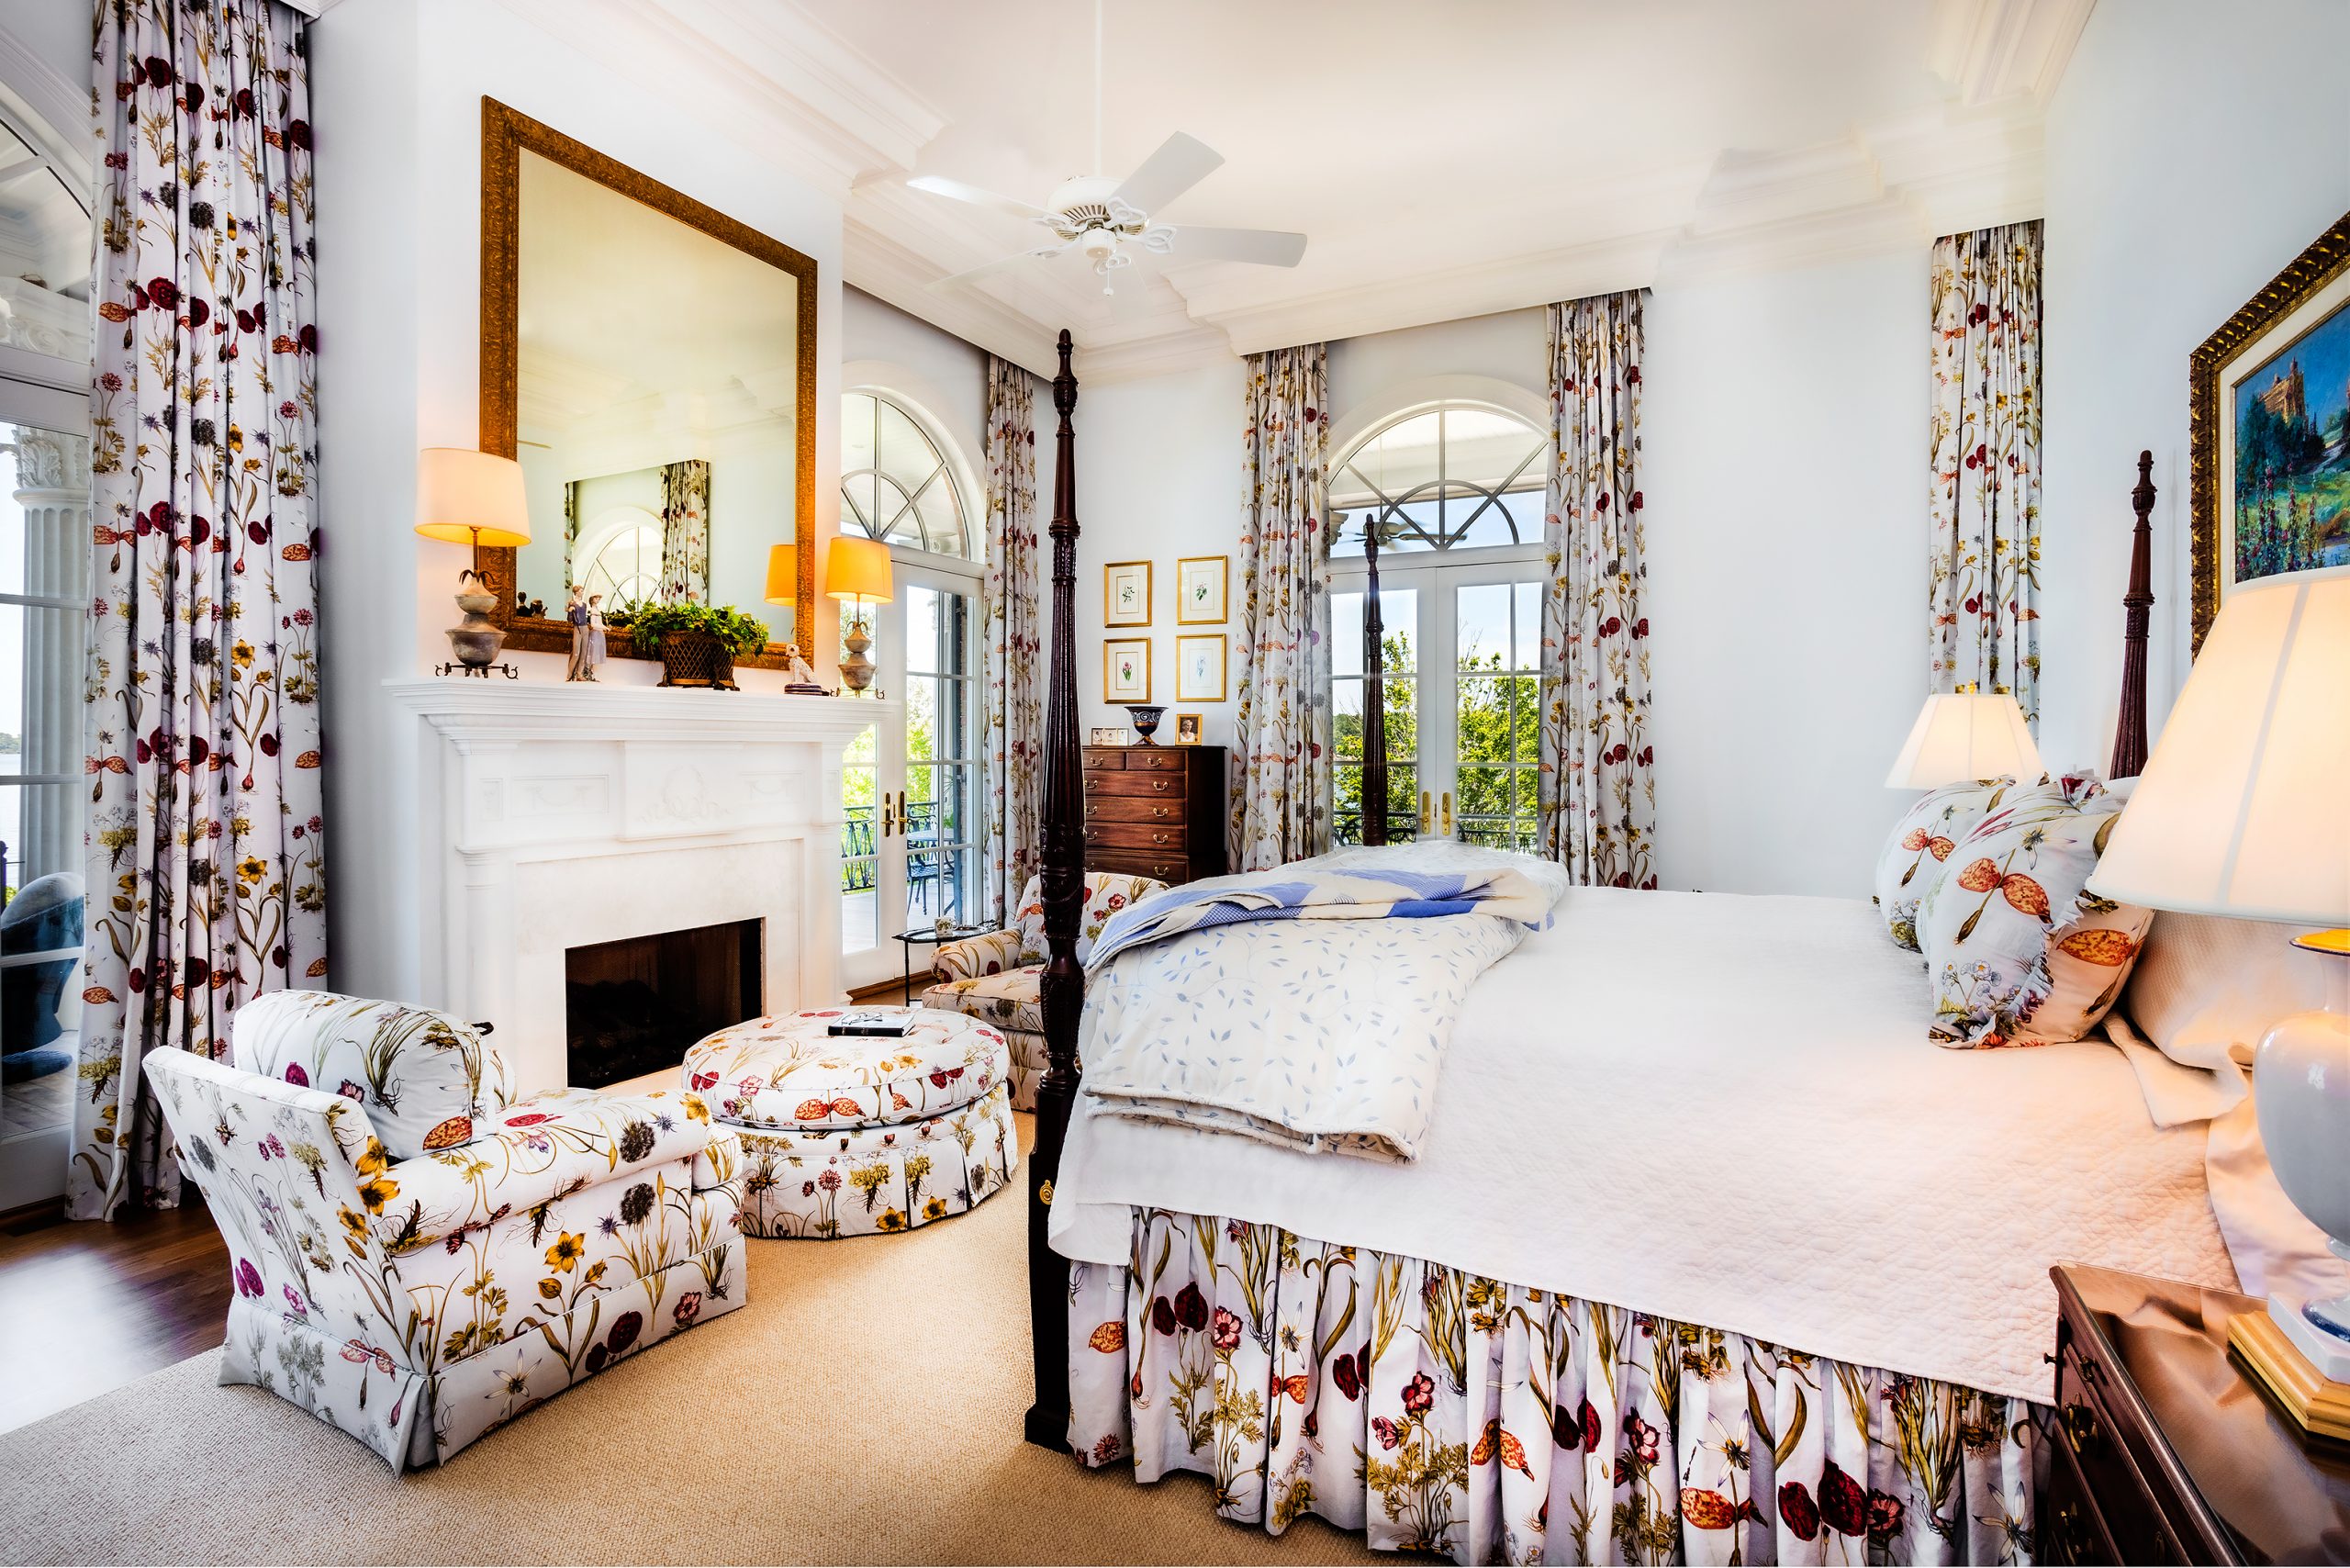 Cathy and Kenyon’s chintz-filled bedroom is elegant yet cozy. Cathy had quilts made for family members with fabric from J. Kenyon’s various dress shirts in memory of his wonderful life as a husband, father, and son. Her quilt lies carefully folded at the foot of the bed.